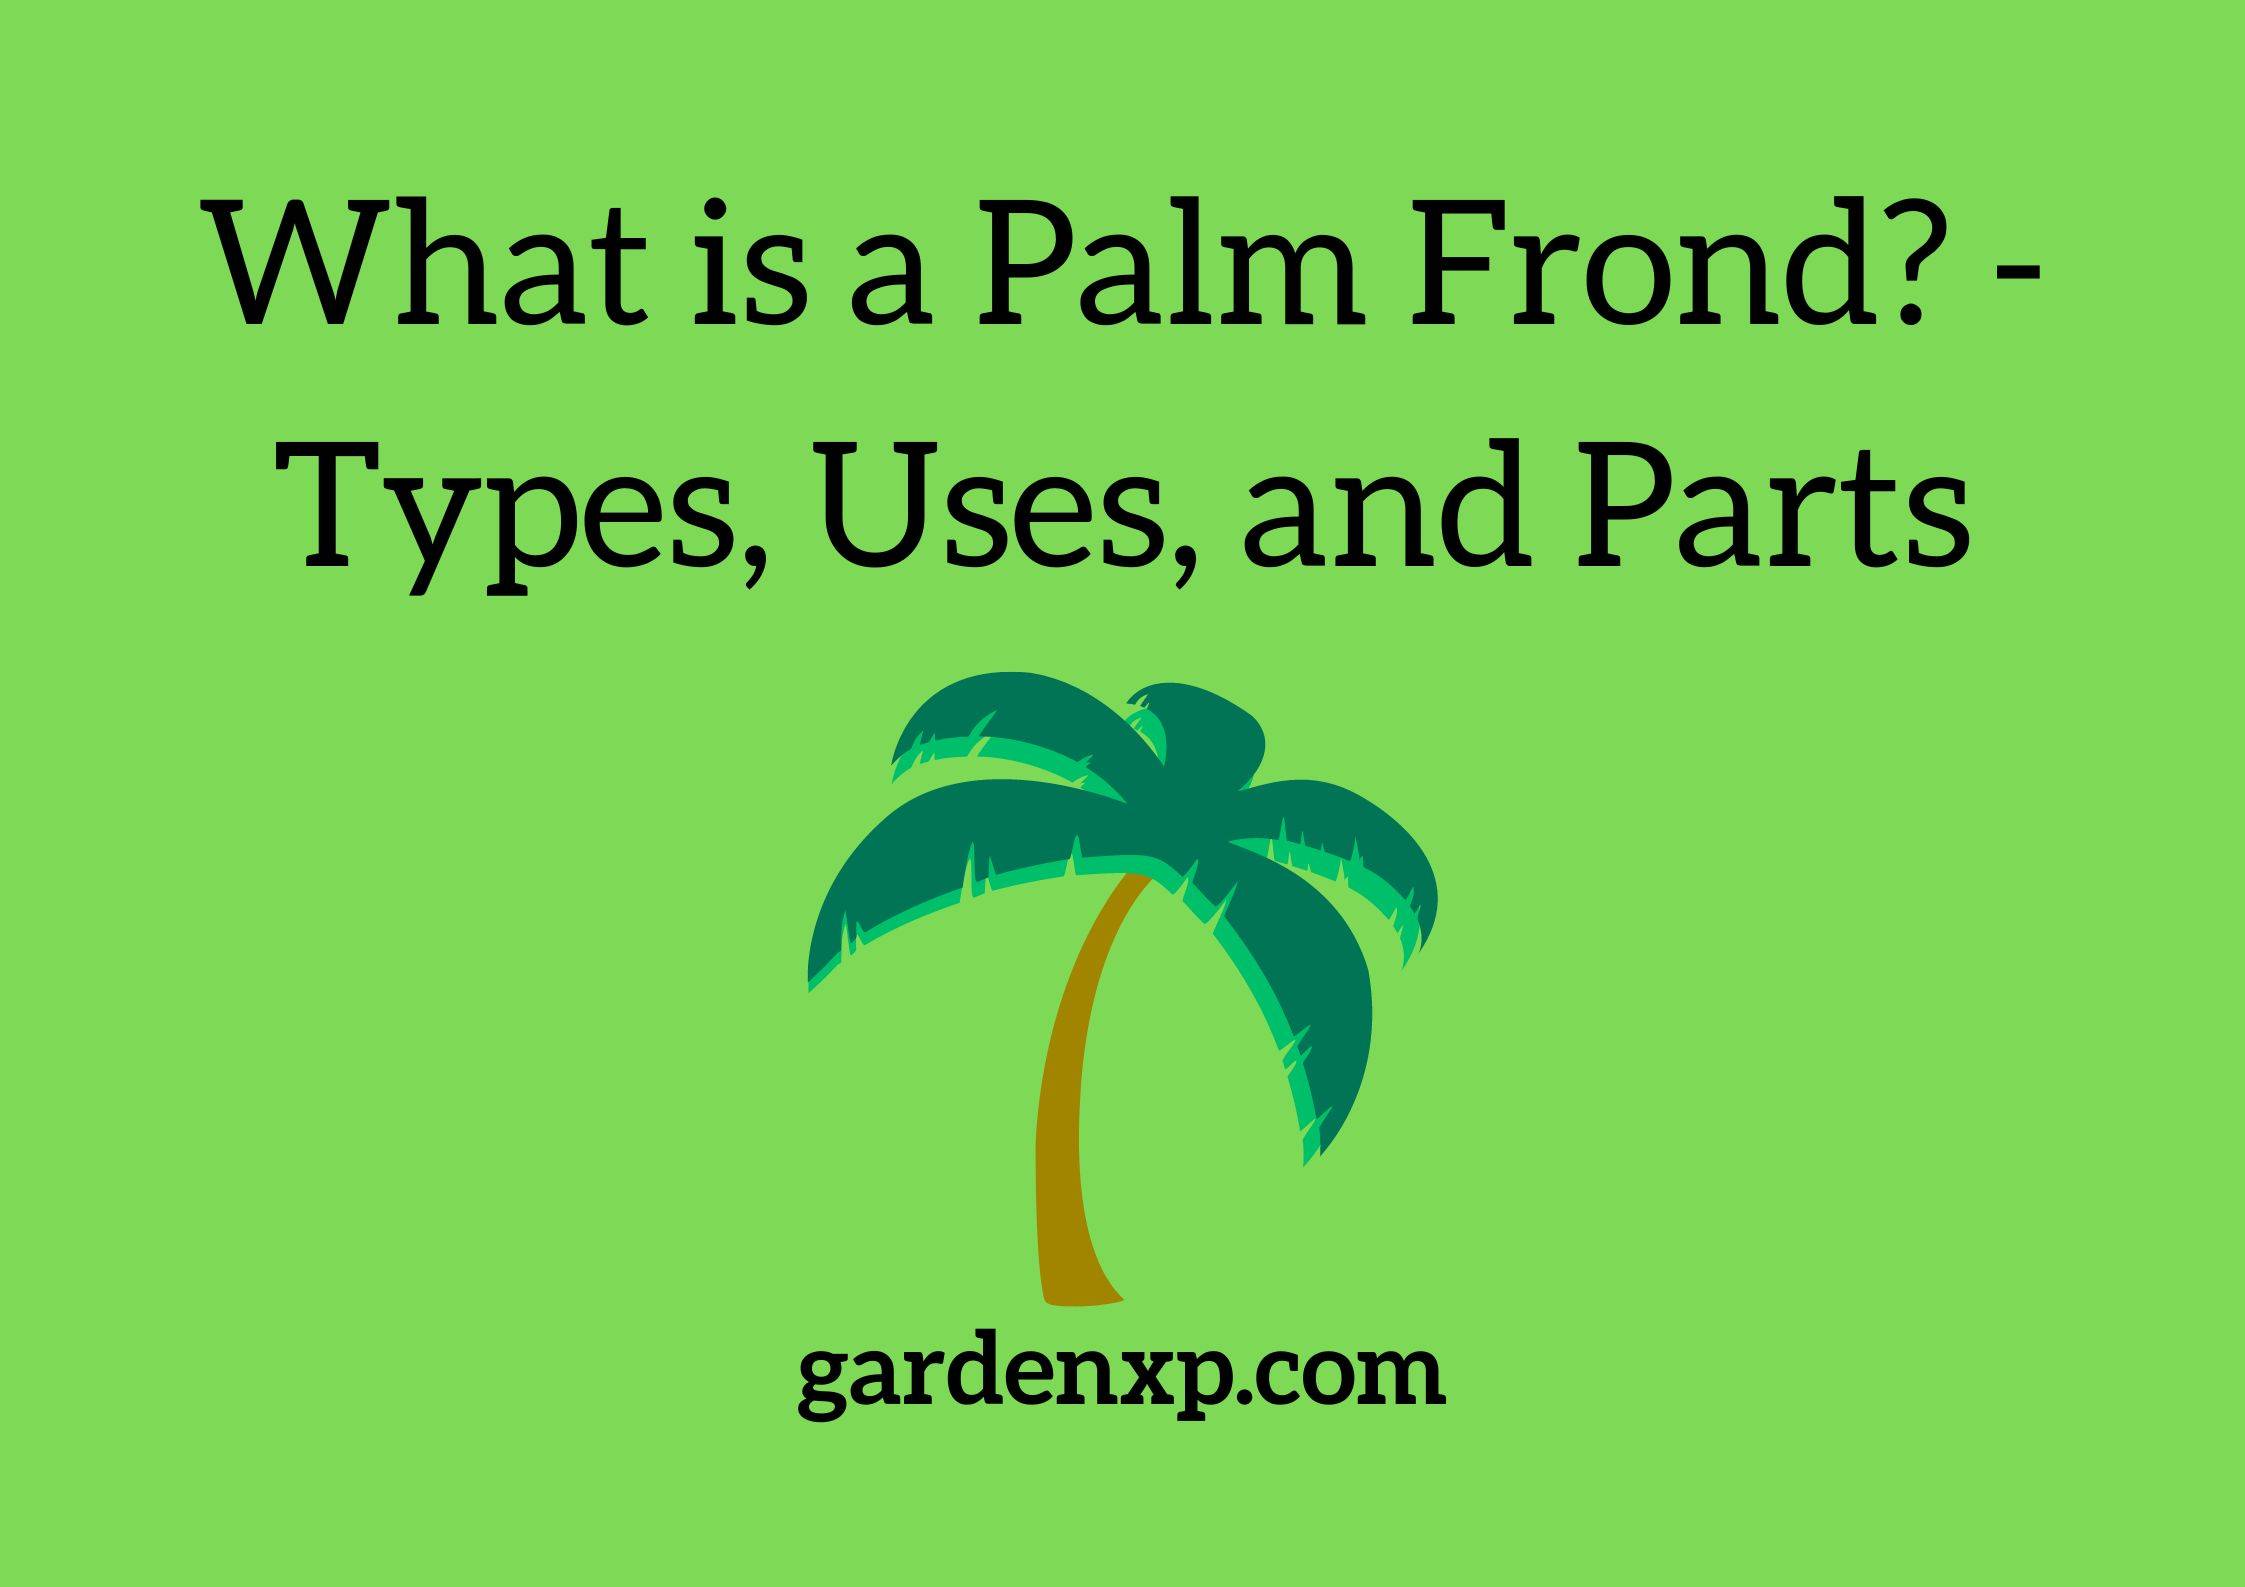 What is a Palm Frond? - Types Uses and Parts